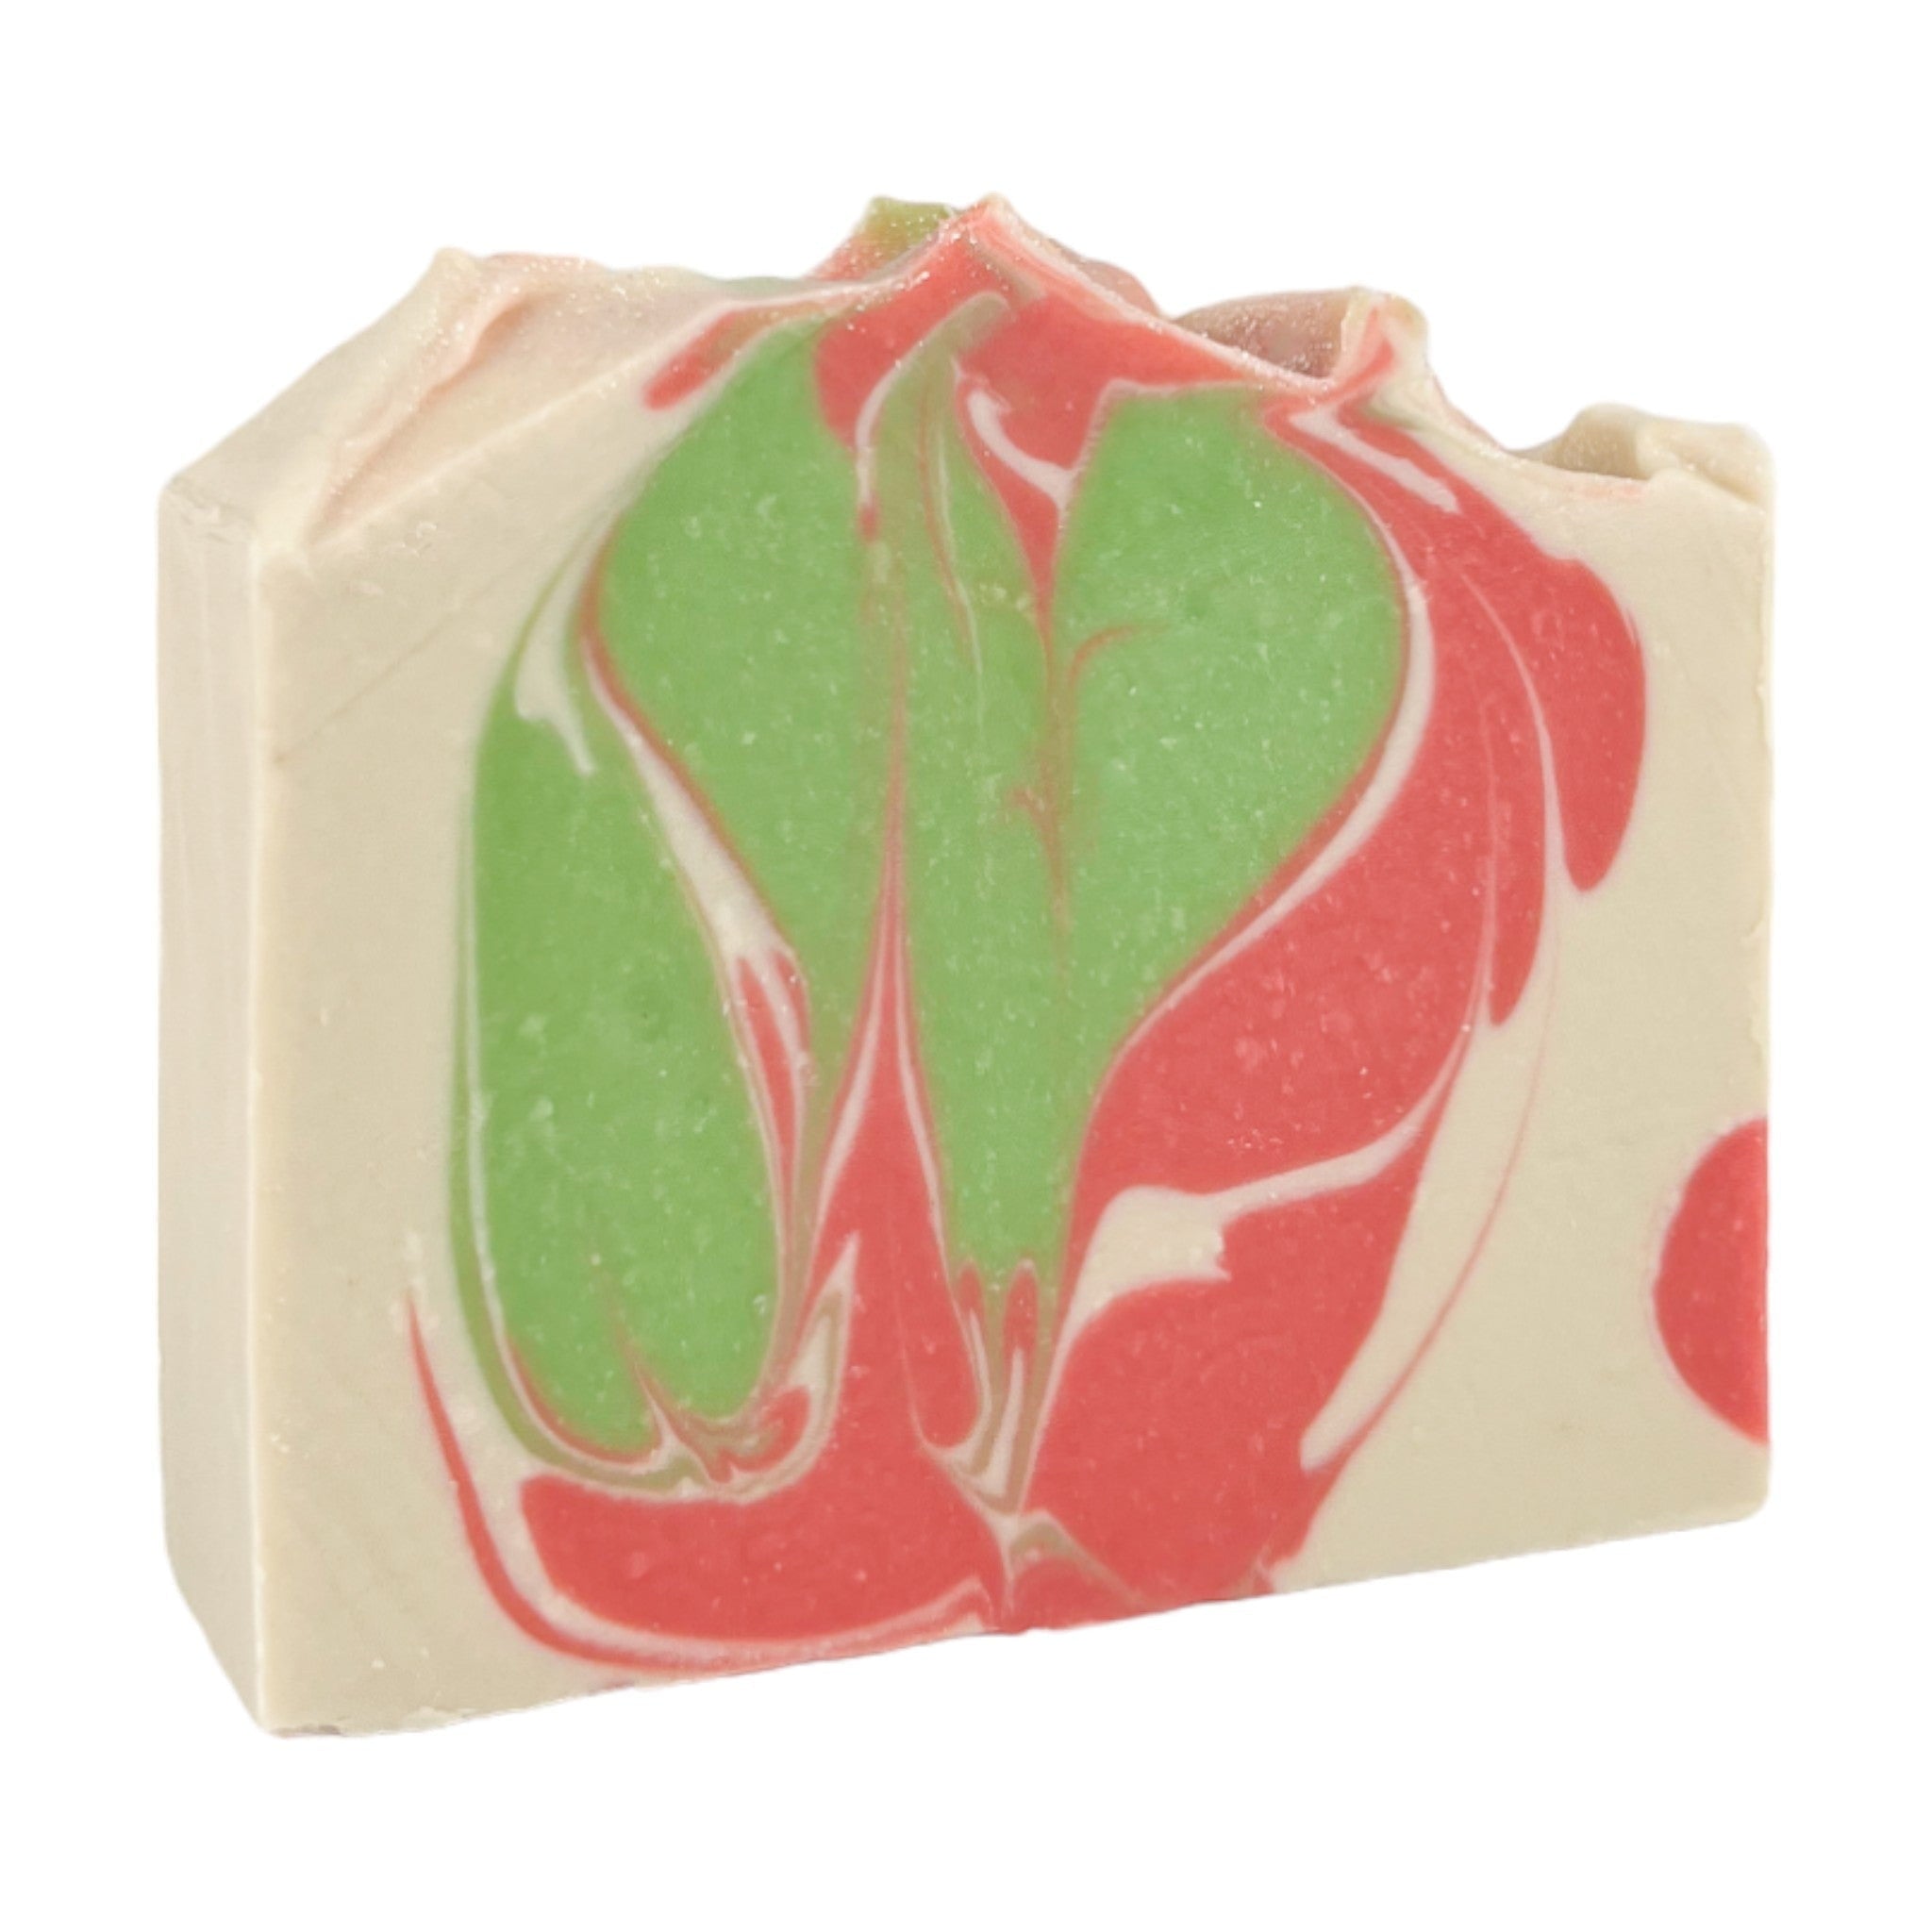 Macintosh Apple -Bar Soap - Old Town Soap Co.